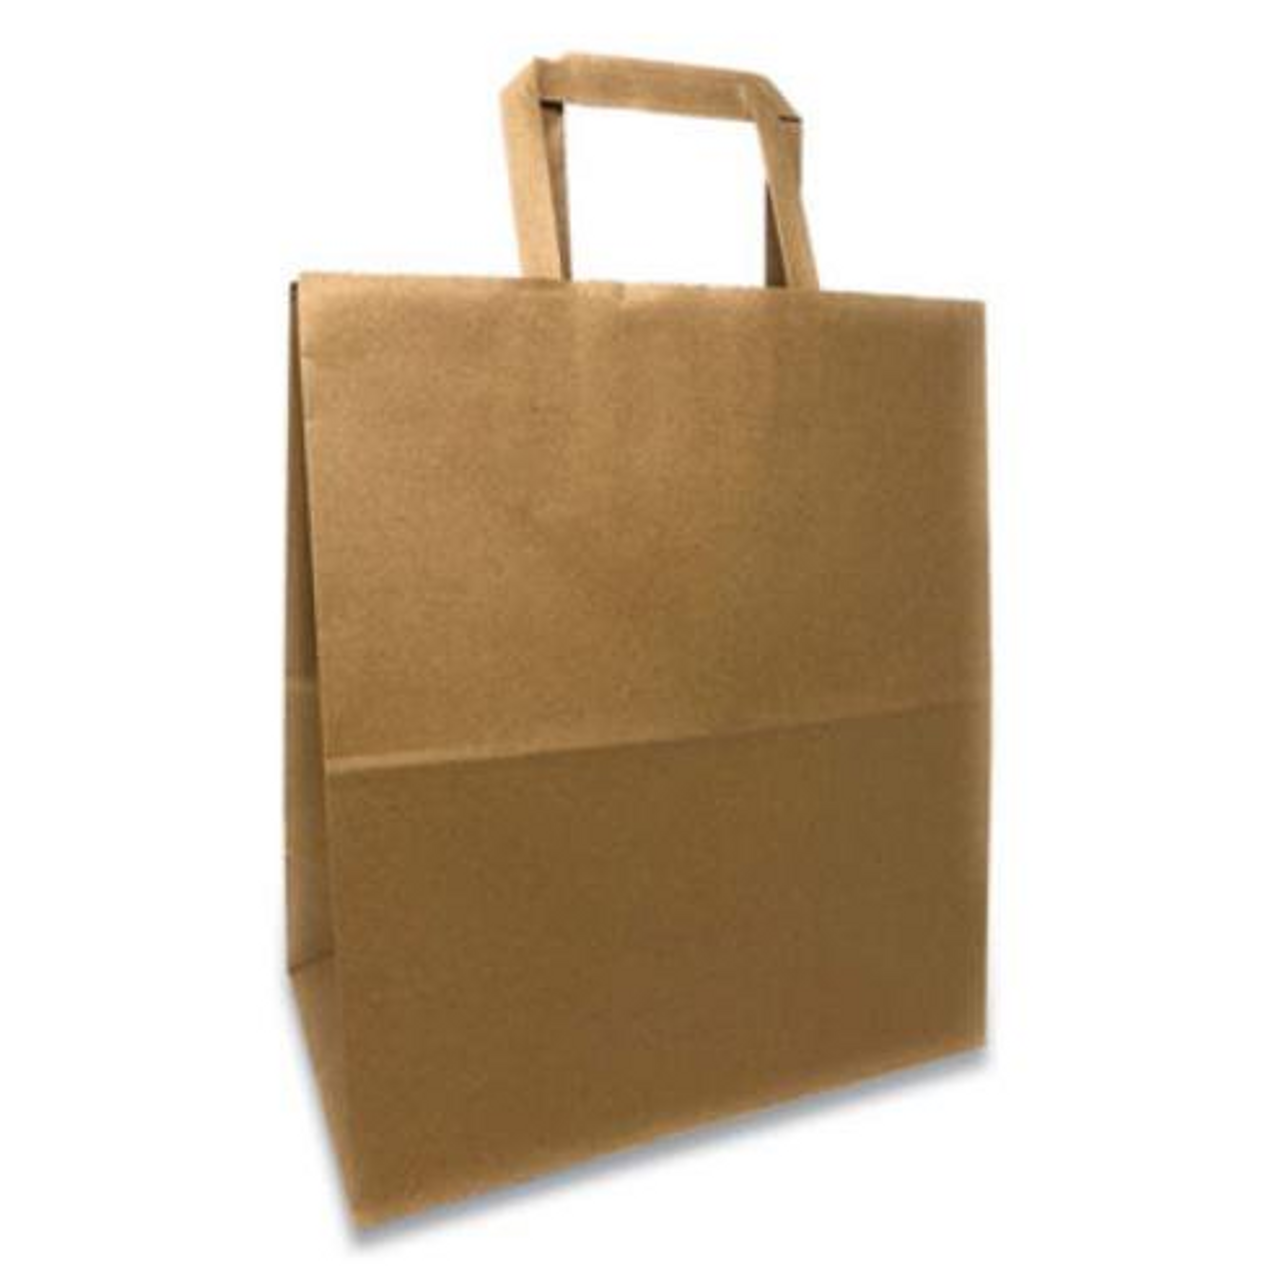 Kraft Paper Grocery Bags, 1/6 BL, Flat Handle - 12 x 7 x 17 for $149.01  Online